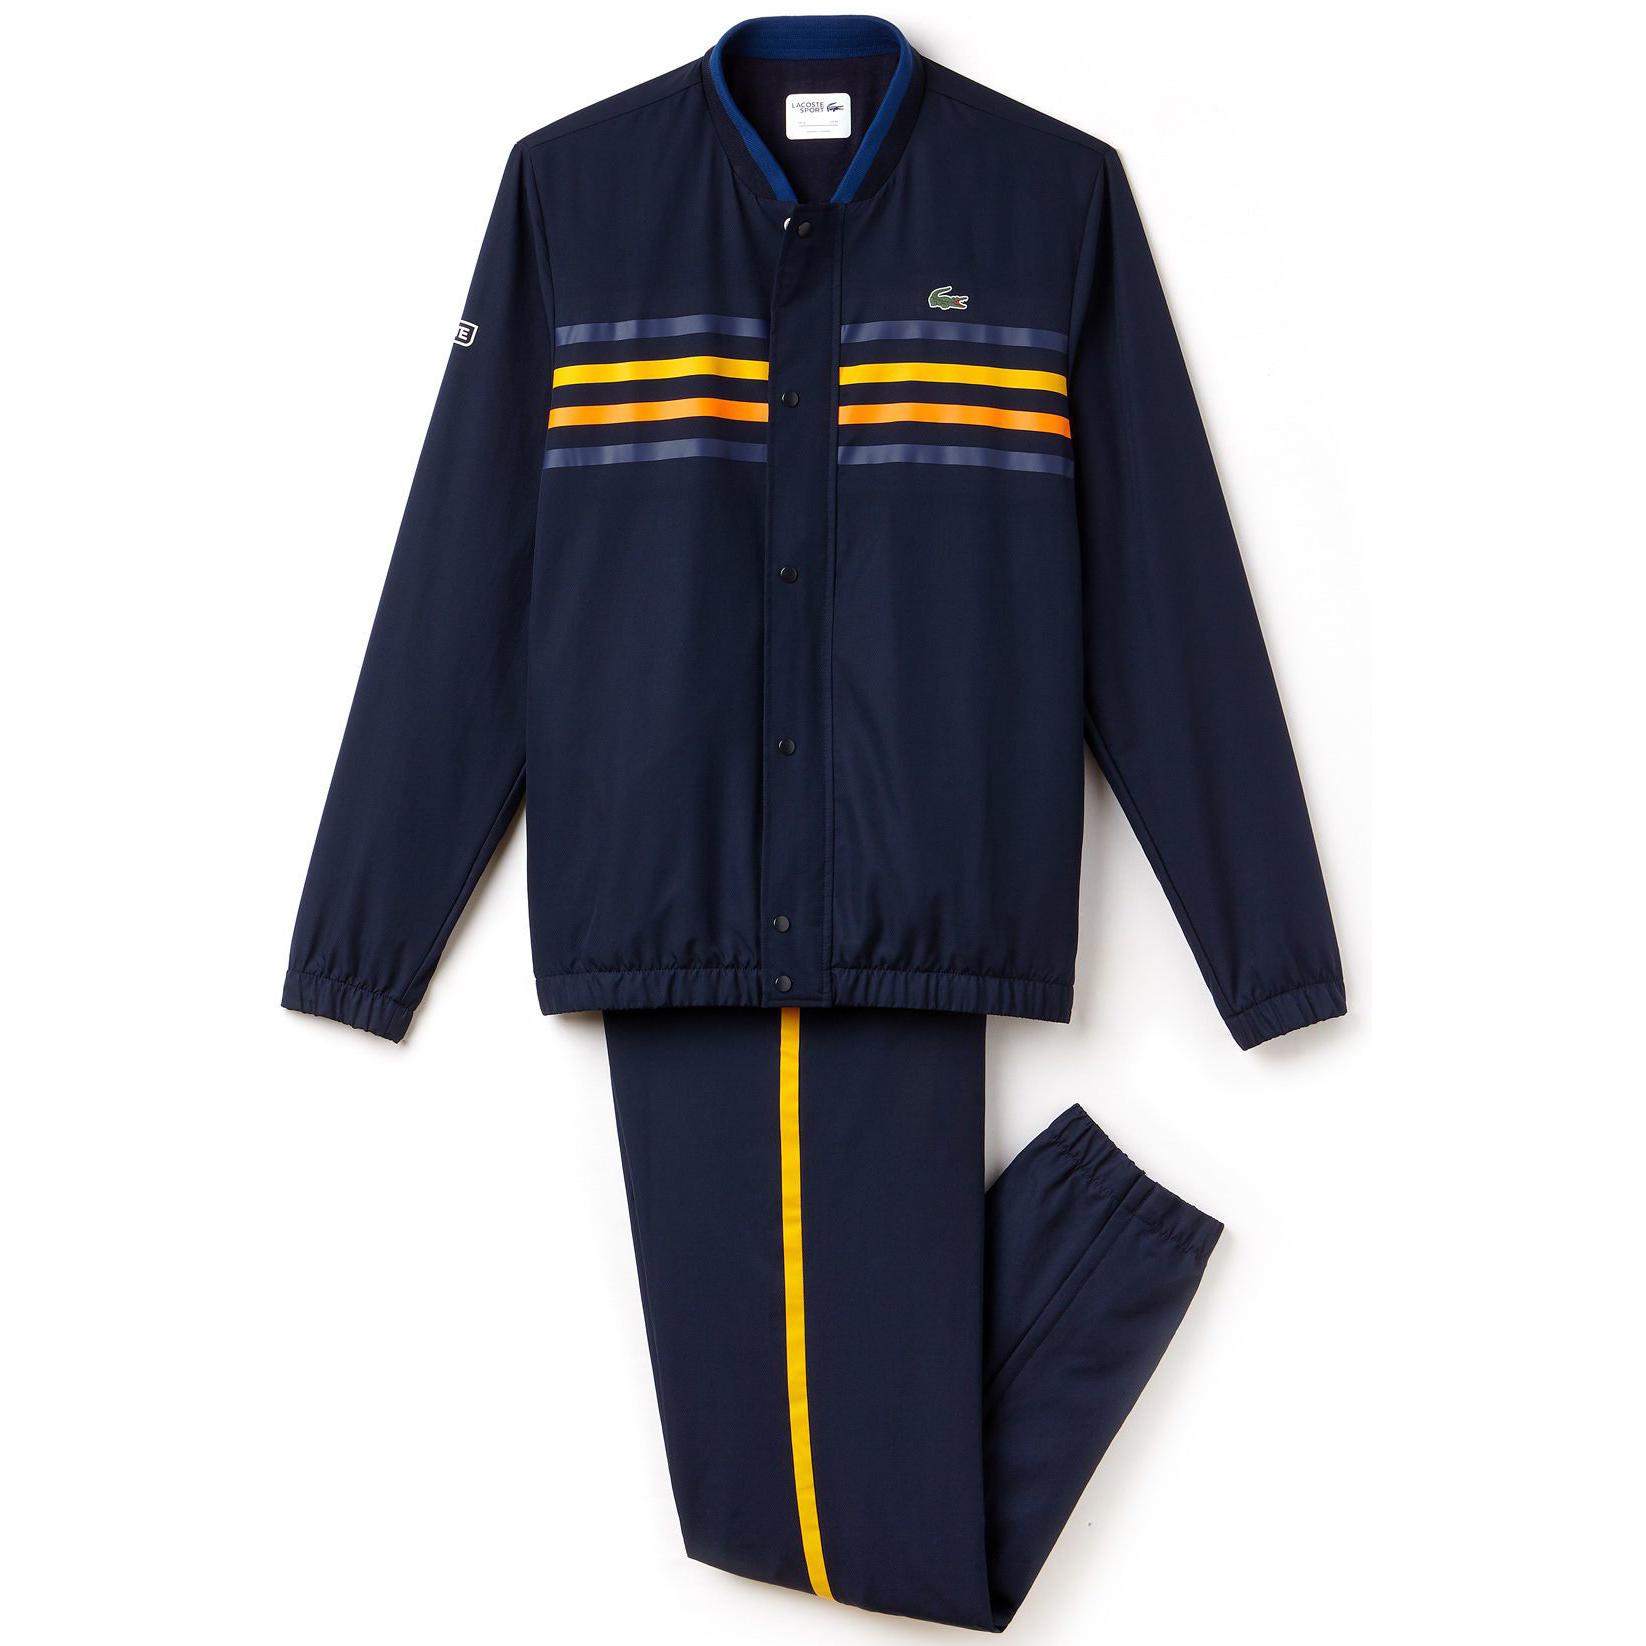 navy blue lacoste tracksuit, OFF 73%,Buy!